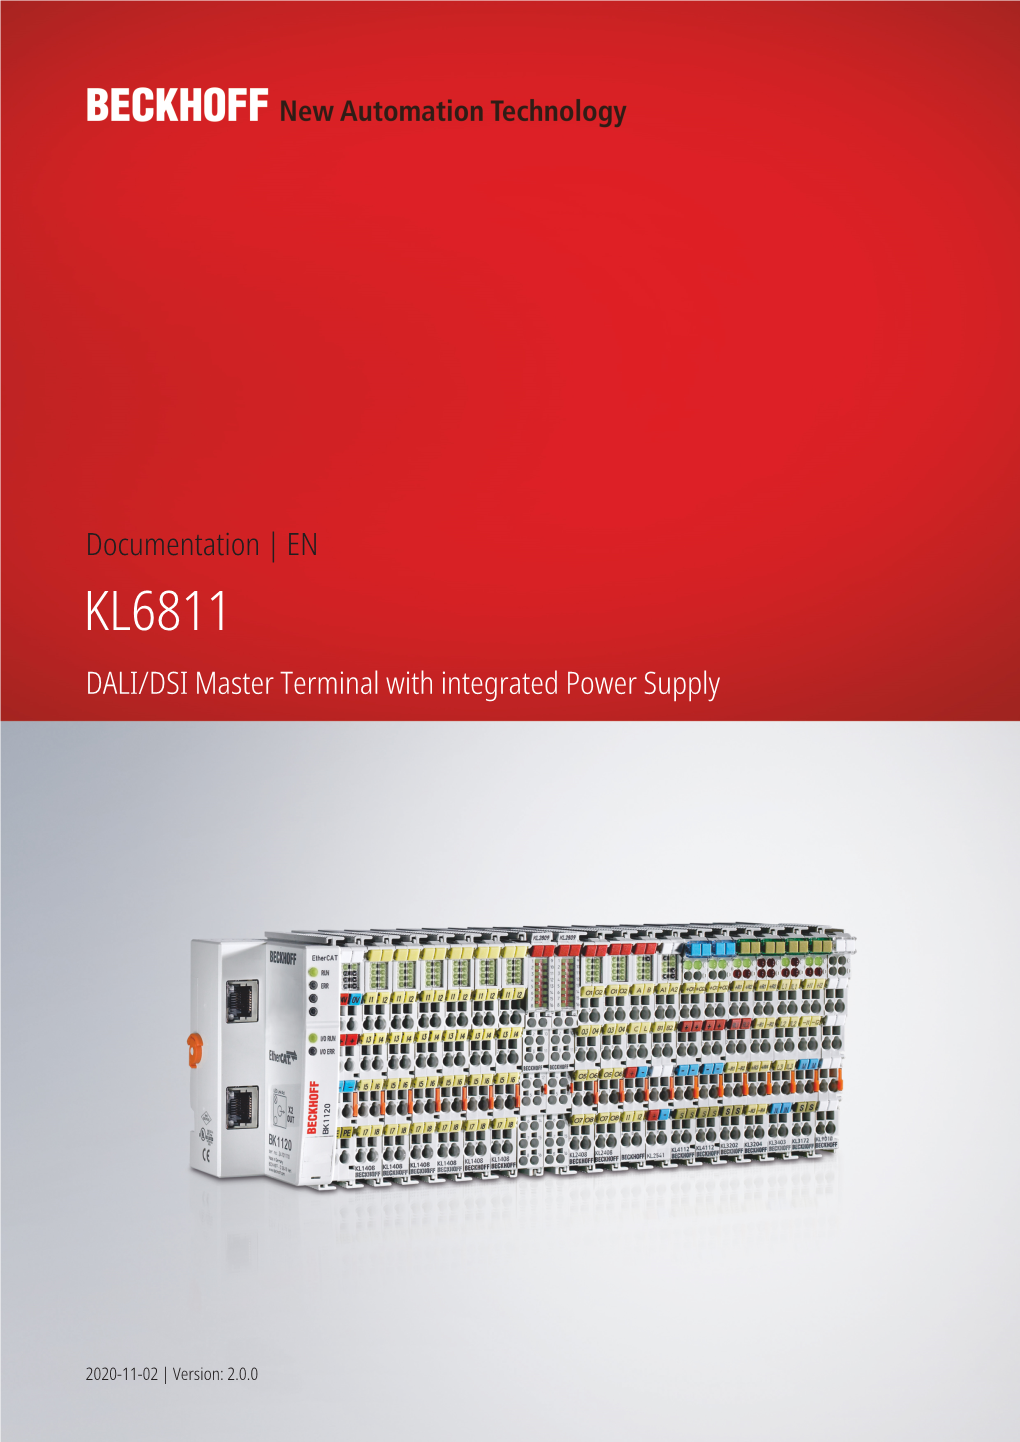 KL6811 DALI/DSI Master Terminal with Integrated Power Supply